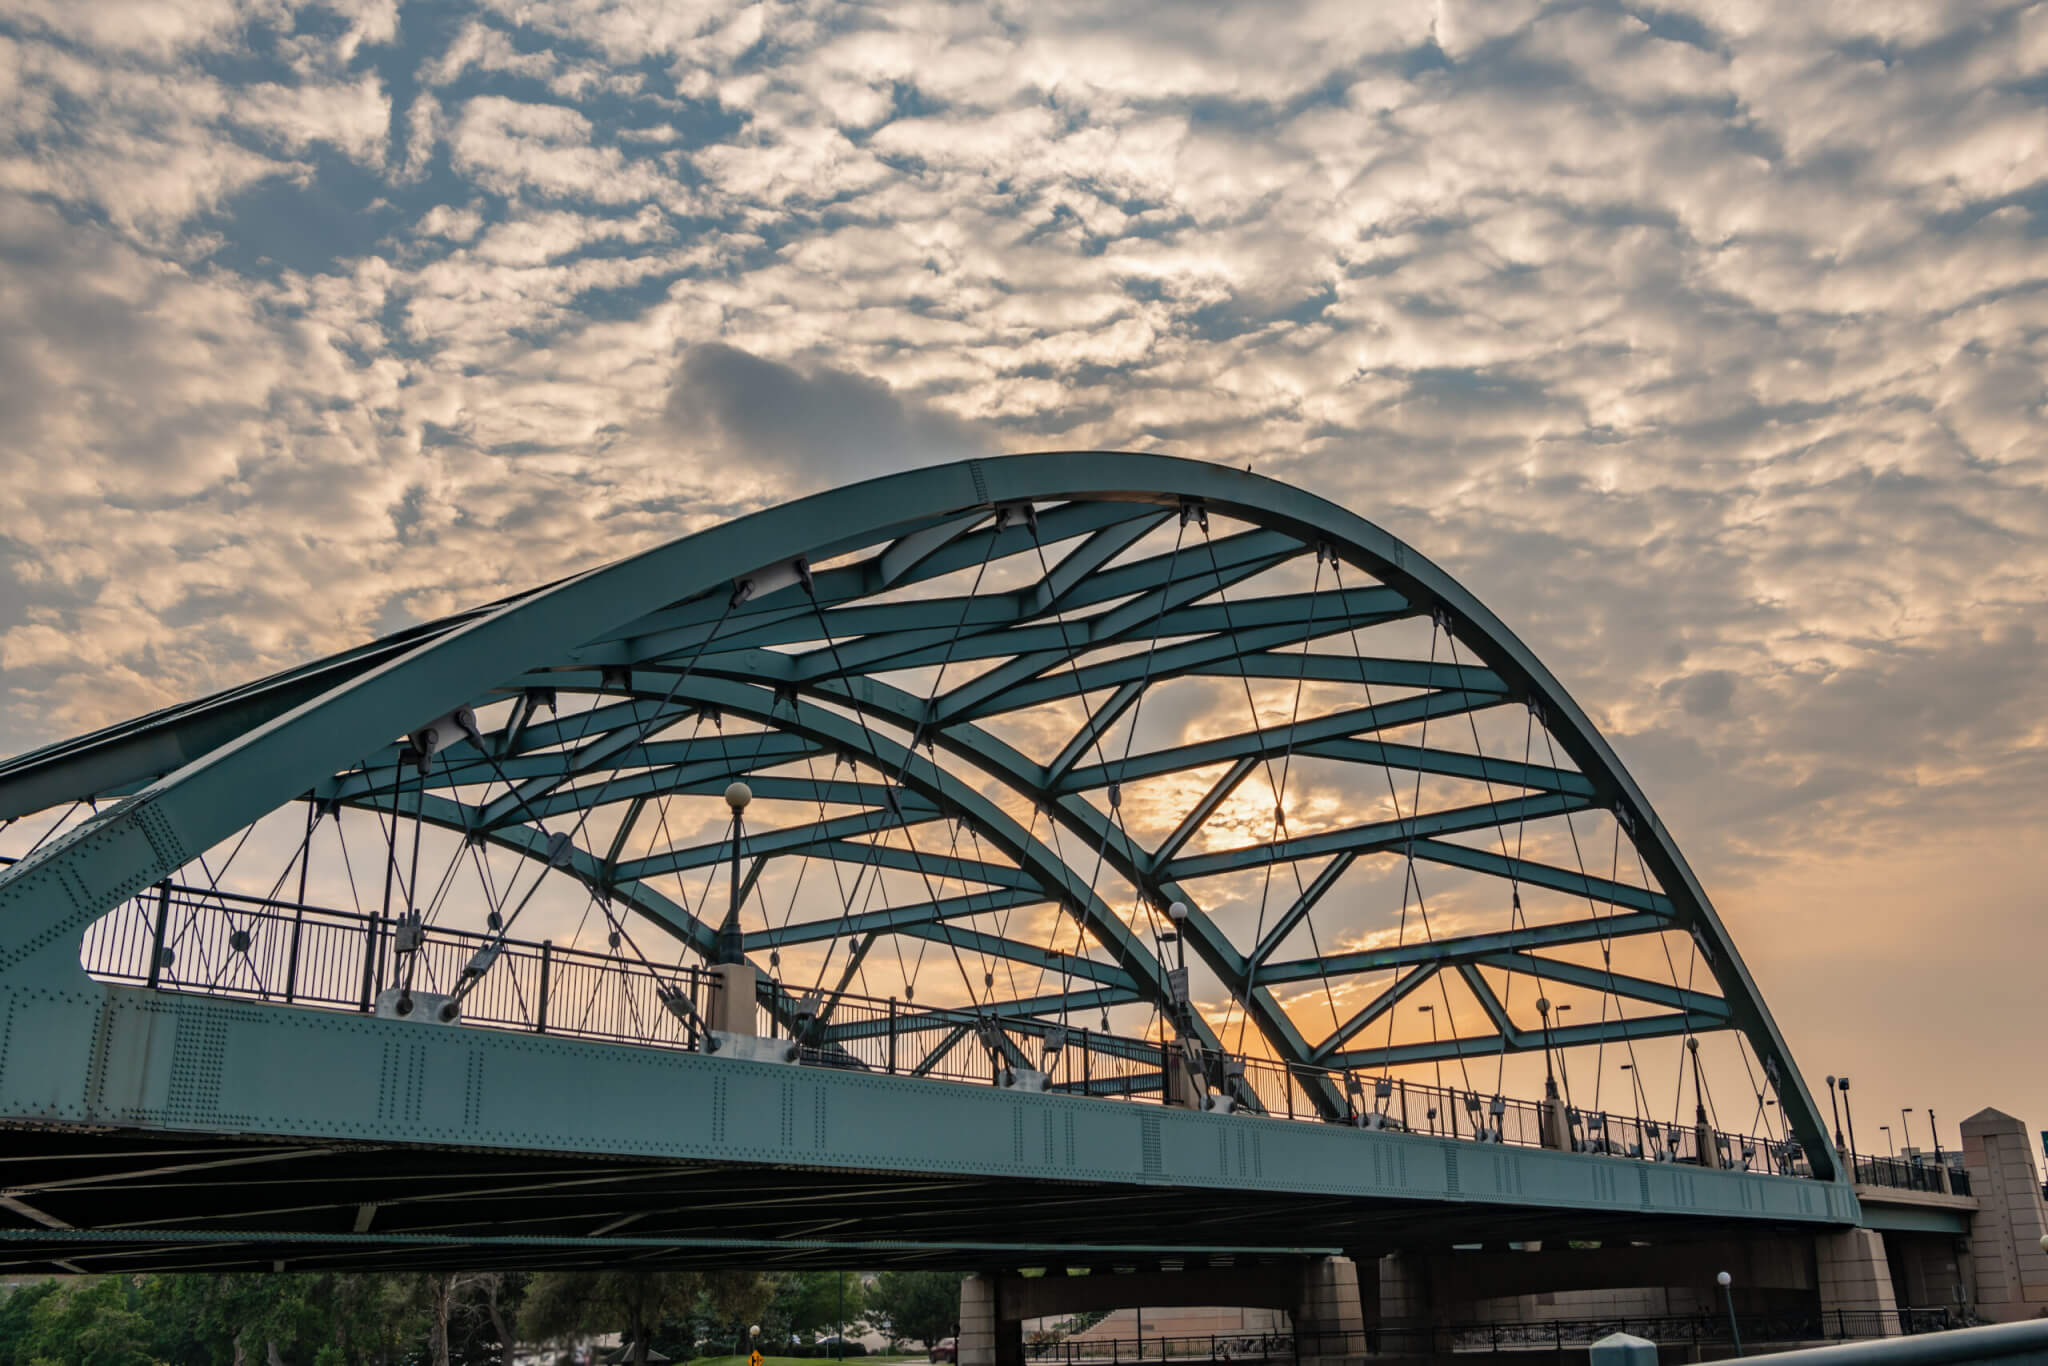 In Denver, Colorado, The famous Colfax Avenue bridge at Confluence Park, connecting the Highland and Lower Downtown (LoDo) neighborhoods.